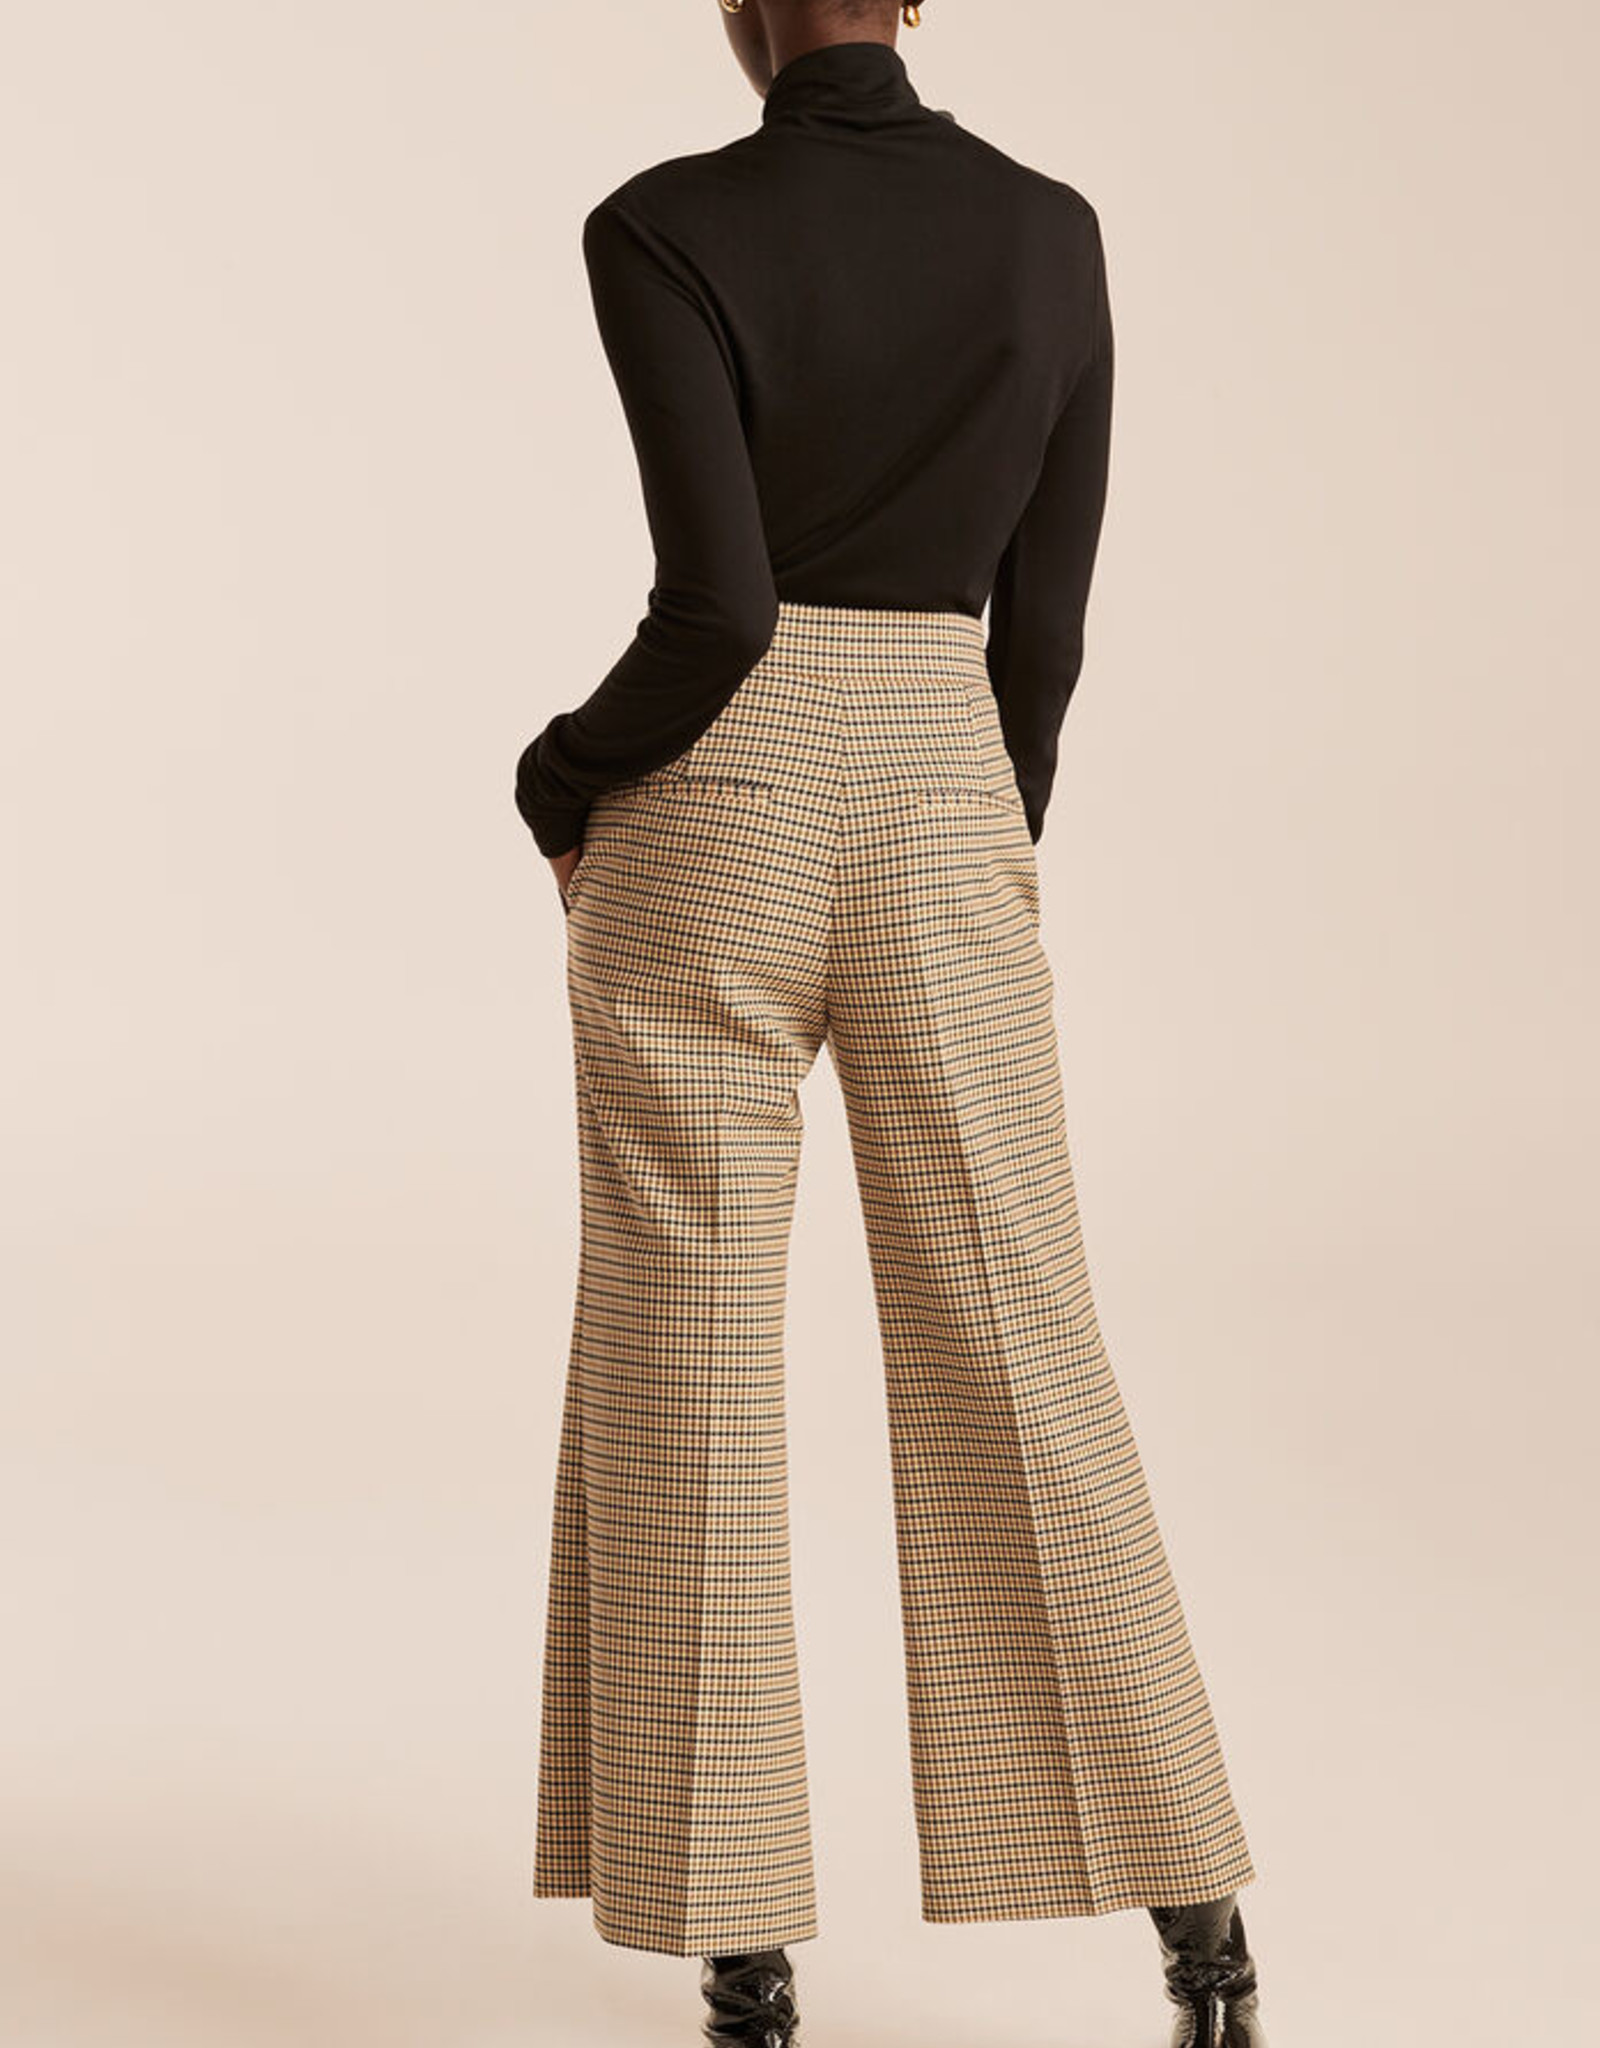 REBECCA TAYLOR Houndstooth Crop Pant